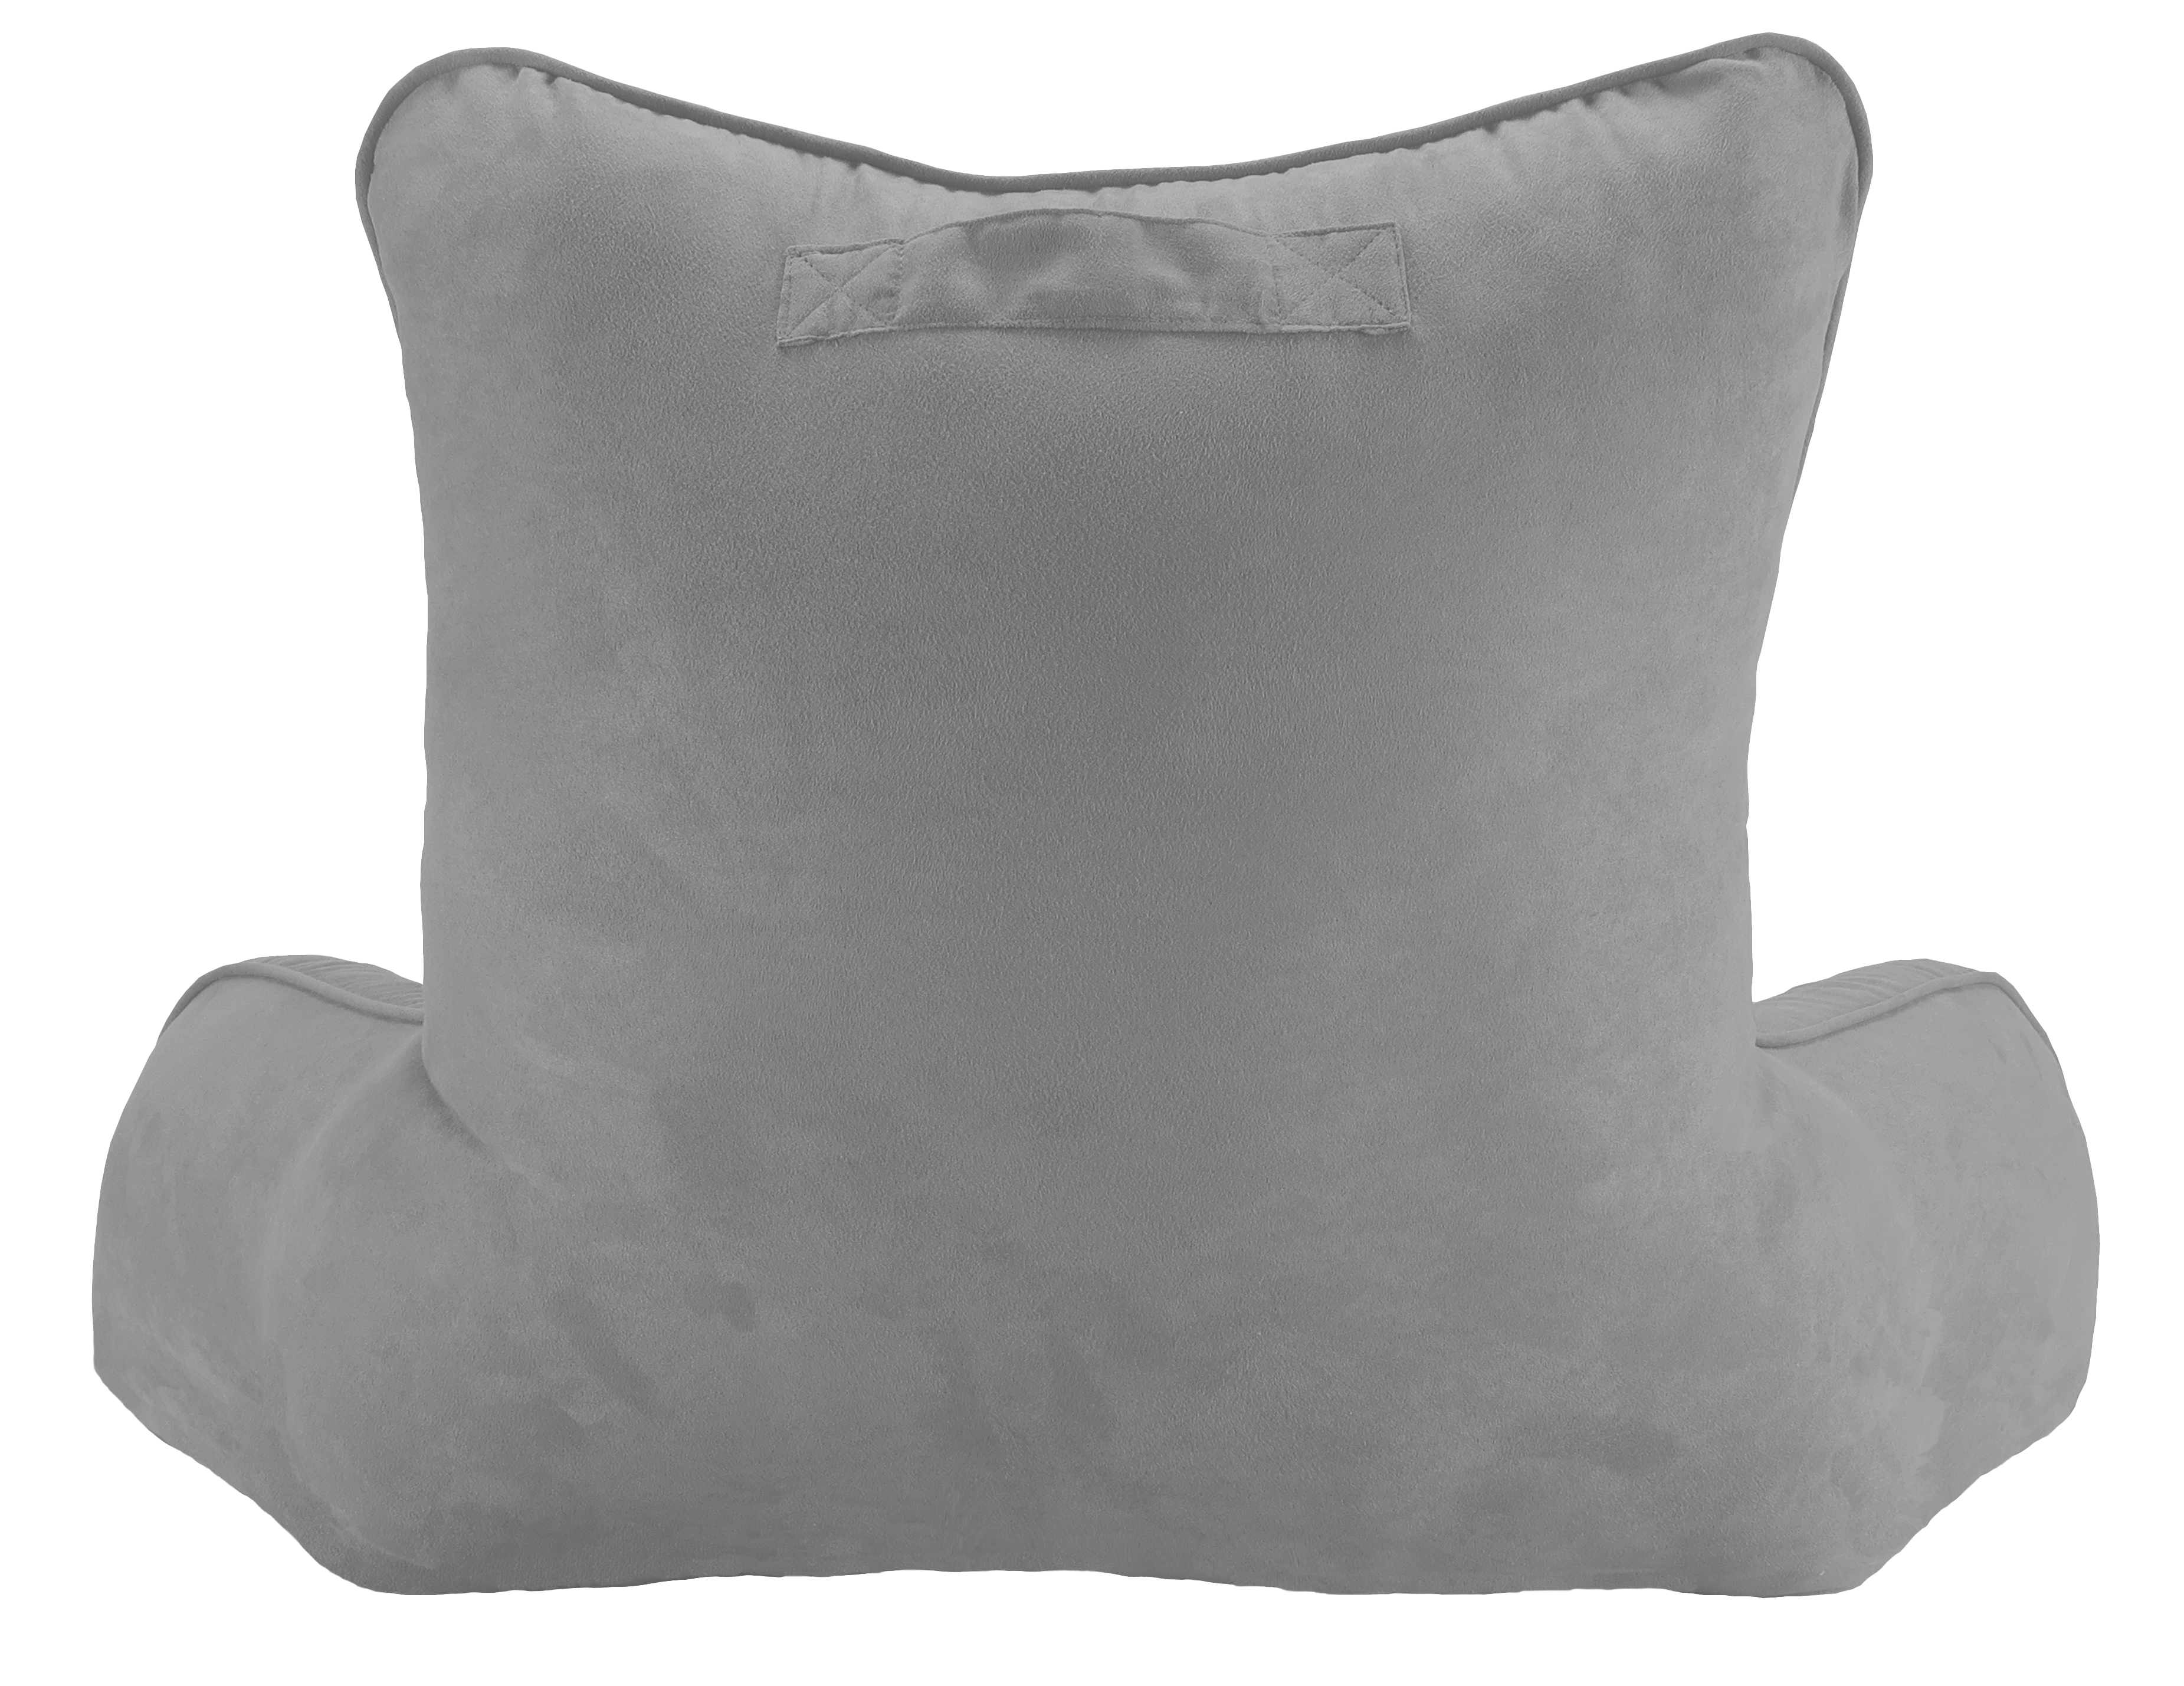 Elements Gray Solid Print Polyester Bed Rest Pillow - image 5 of 5